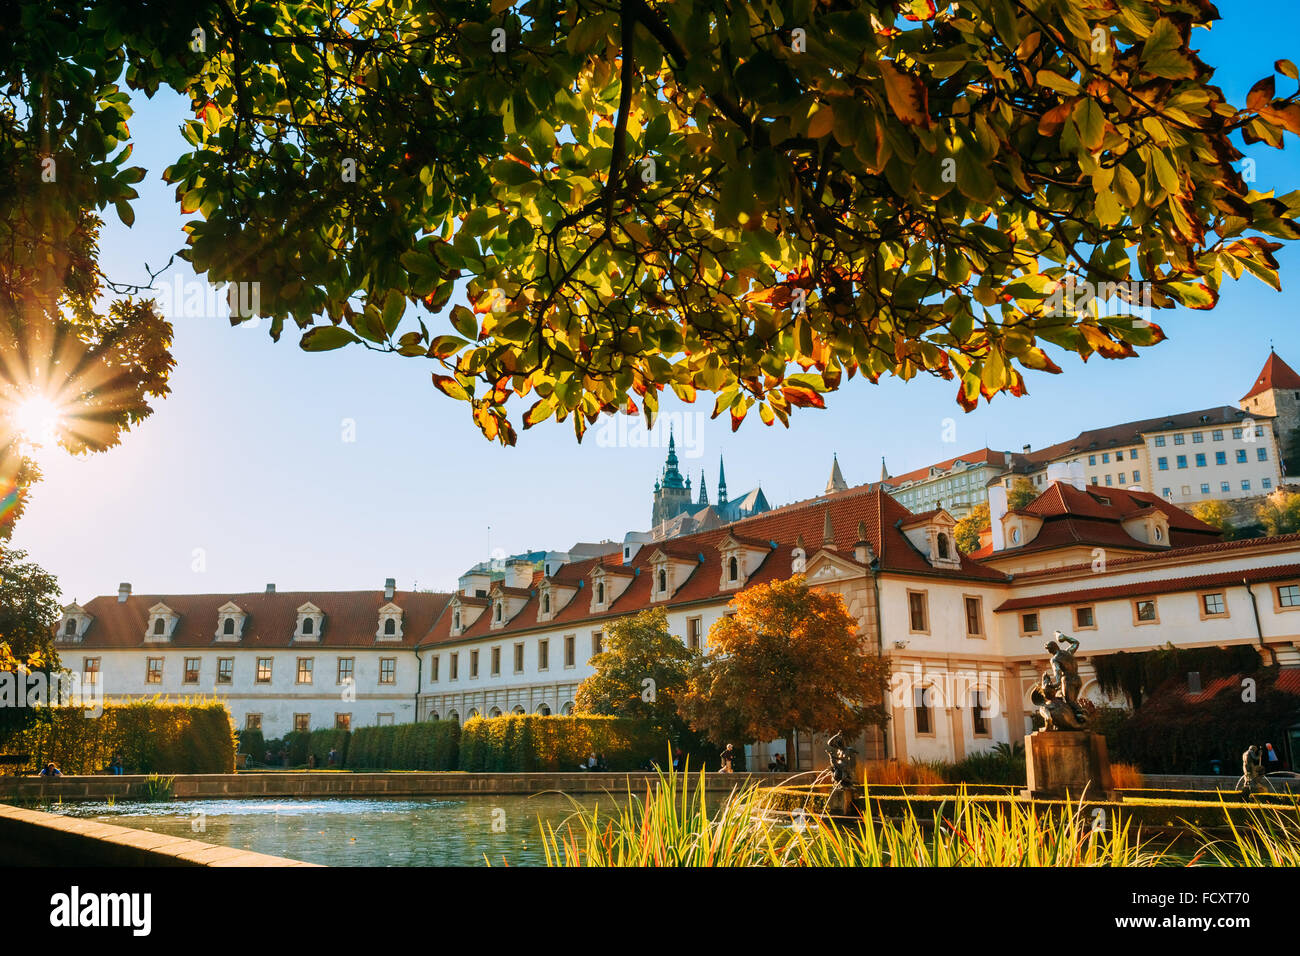 The facade of the palace and portion of the Wallenstein Garden with Prague Castle in the background. Czech Republic Stock Photo